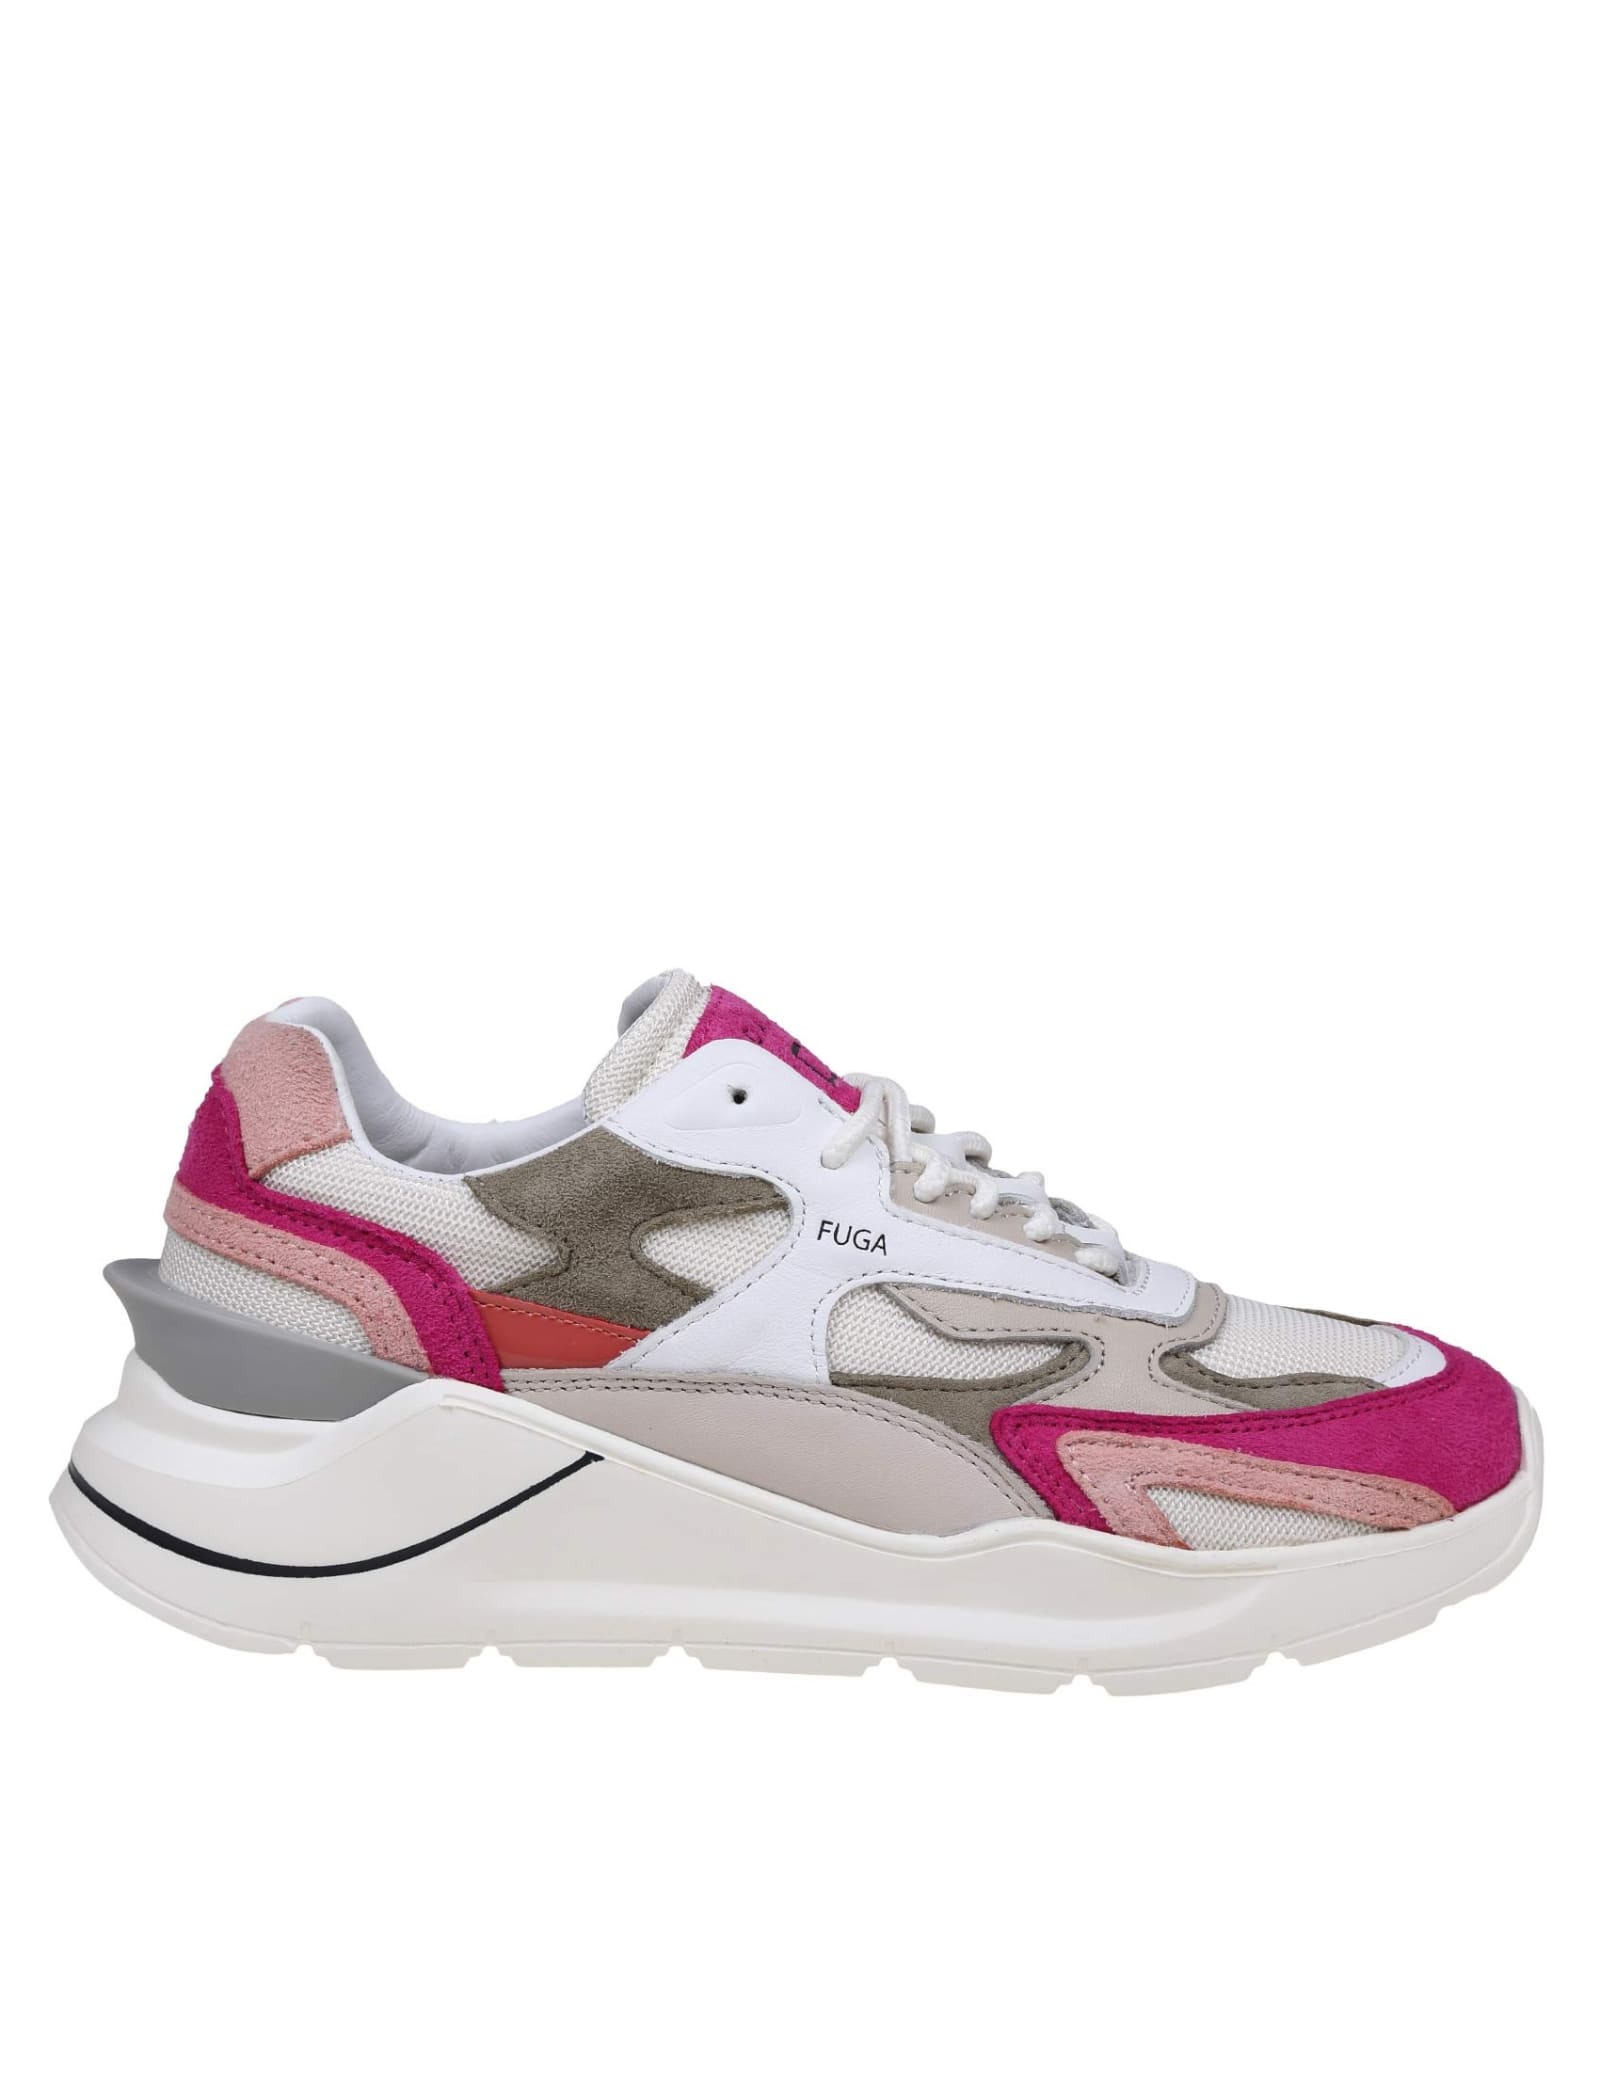 Fuga Sneakers In White/fuchsia Leather And Suede